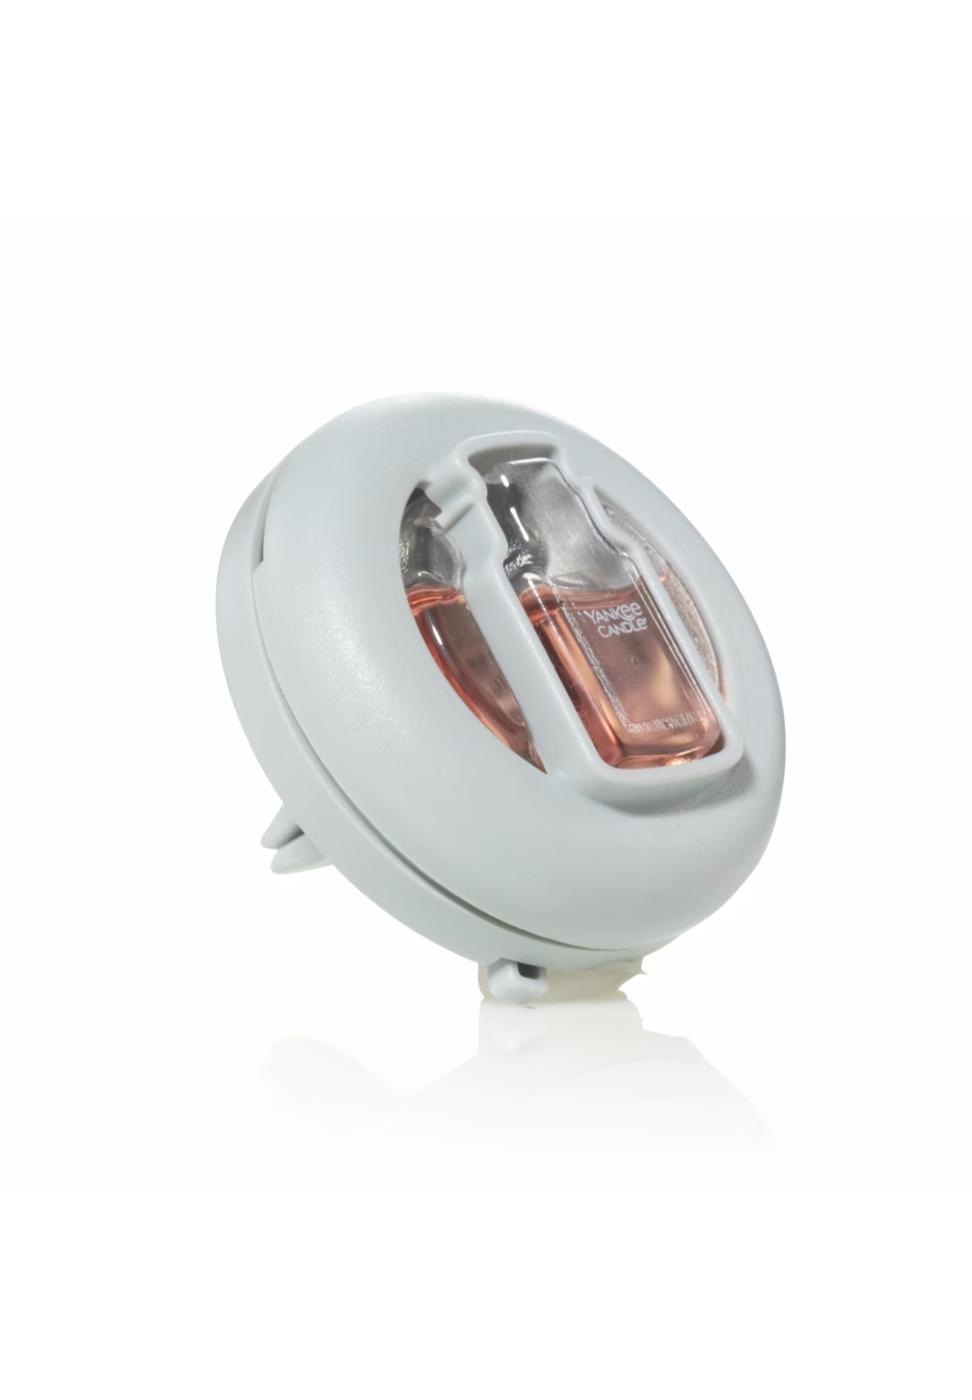 Yankee Candle Smart Scent Vent Clip - Pink Sands; image 3 of 3